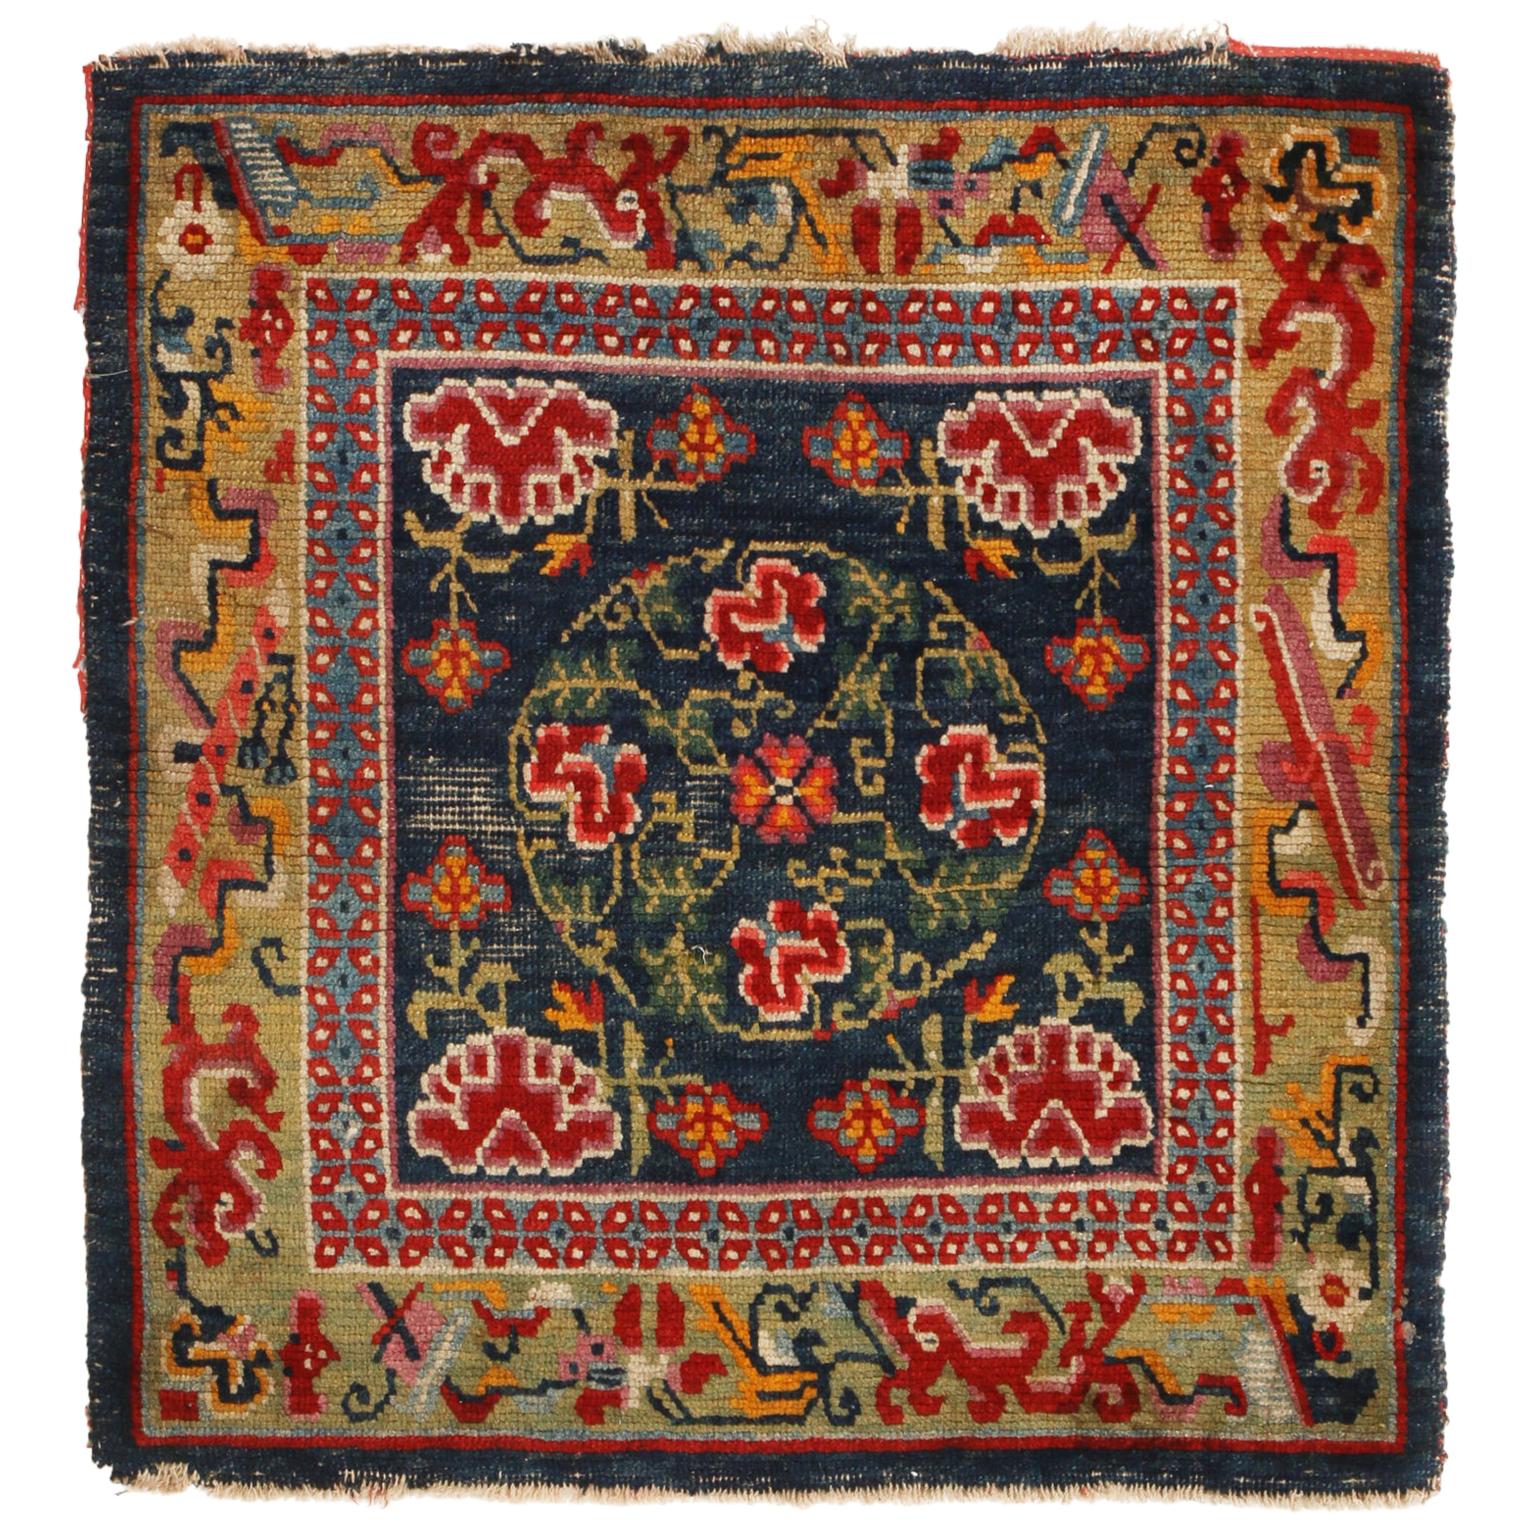 Antique Tibetan Geometric Green and Red Wool Floral Rug